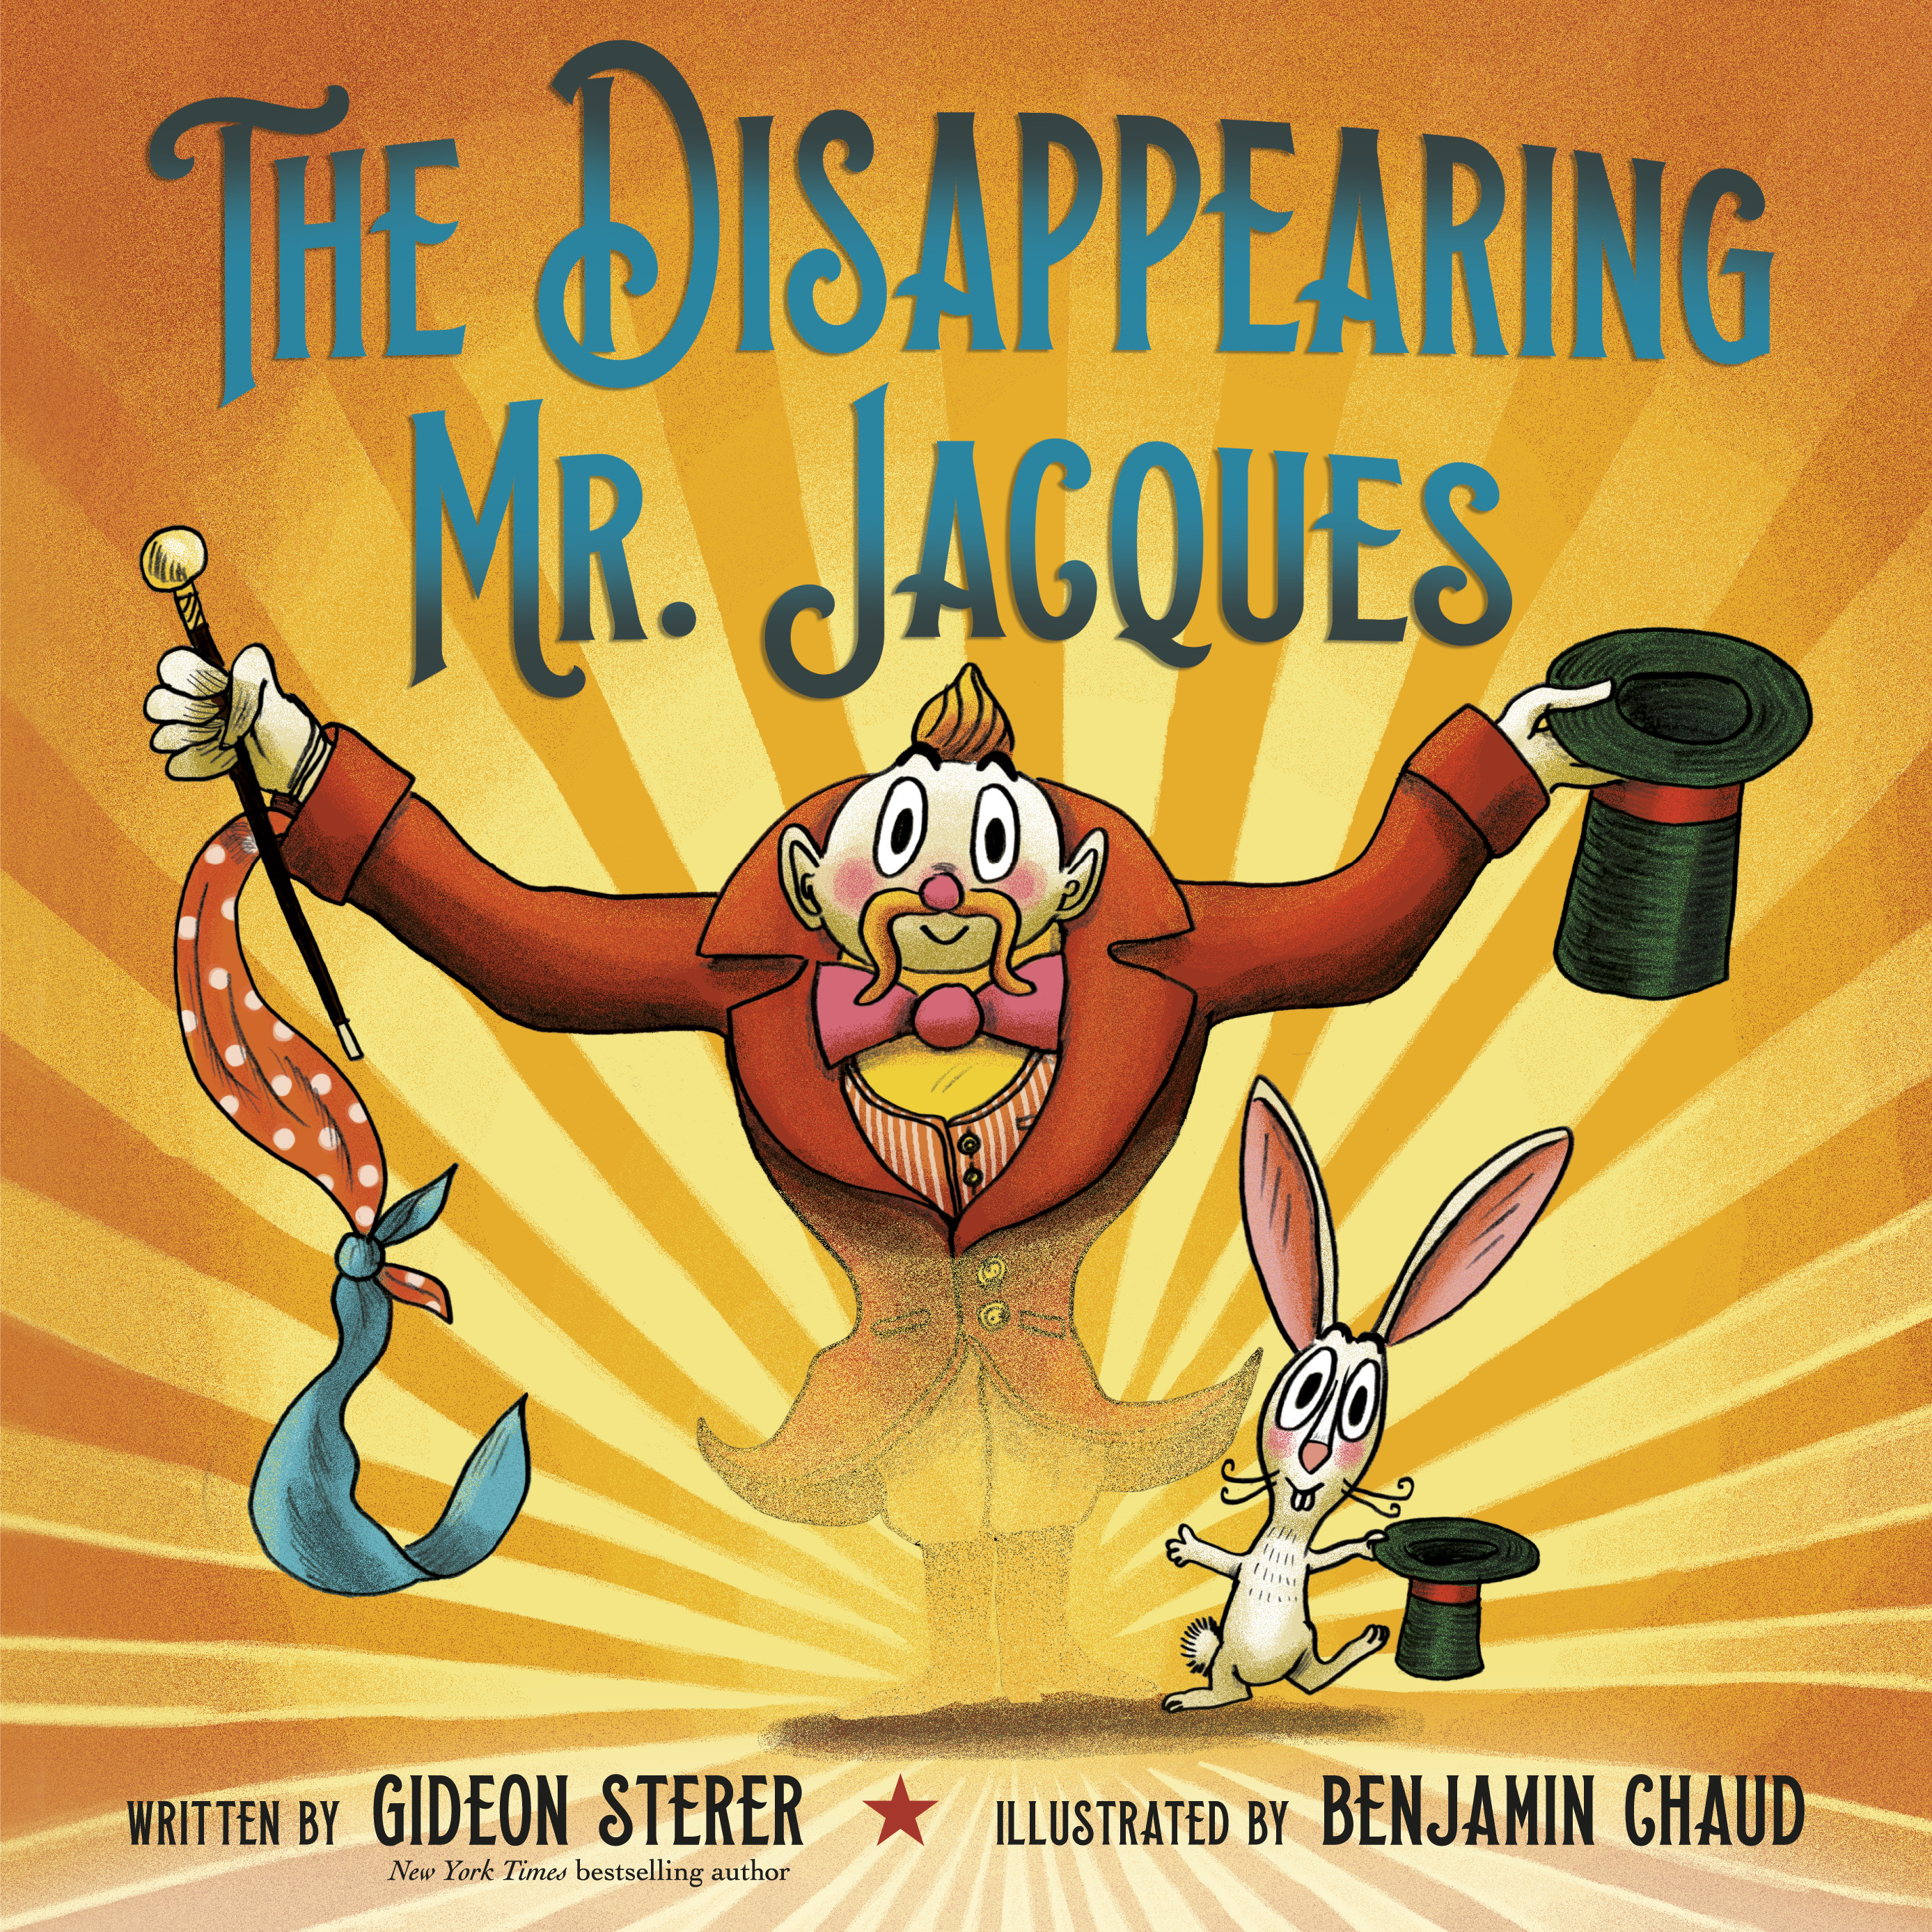 The Disappearing Mr. Jacques | Sterer, Gideon